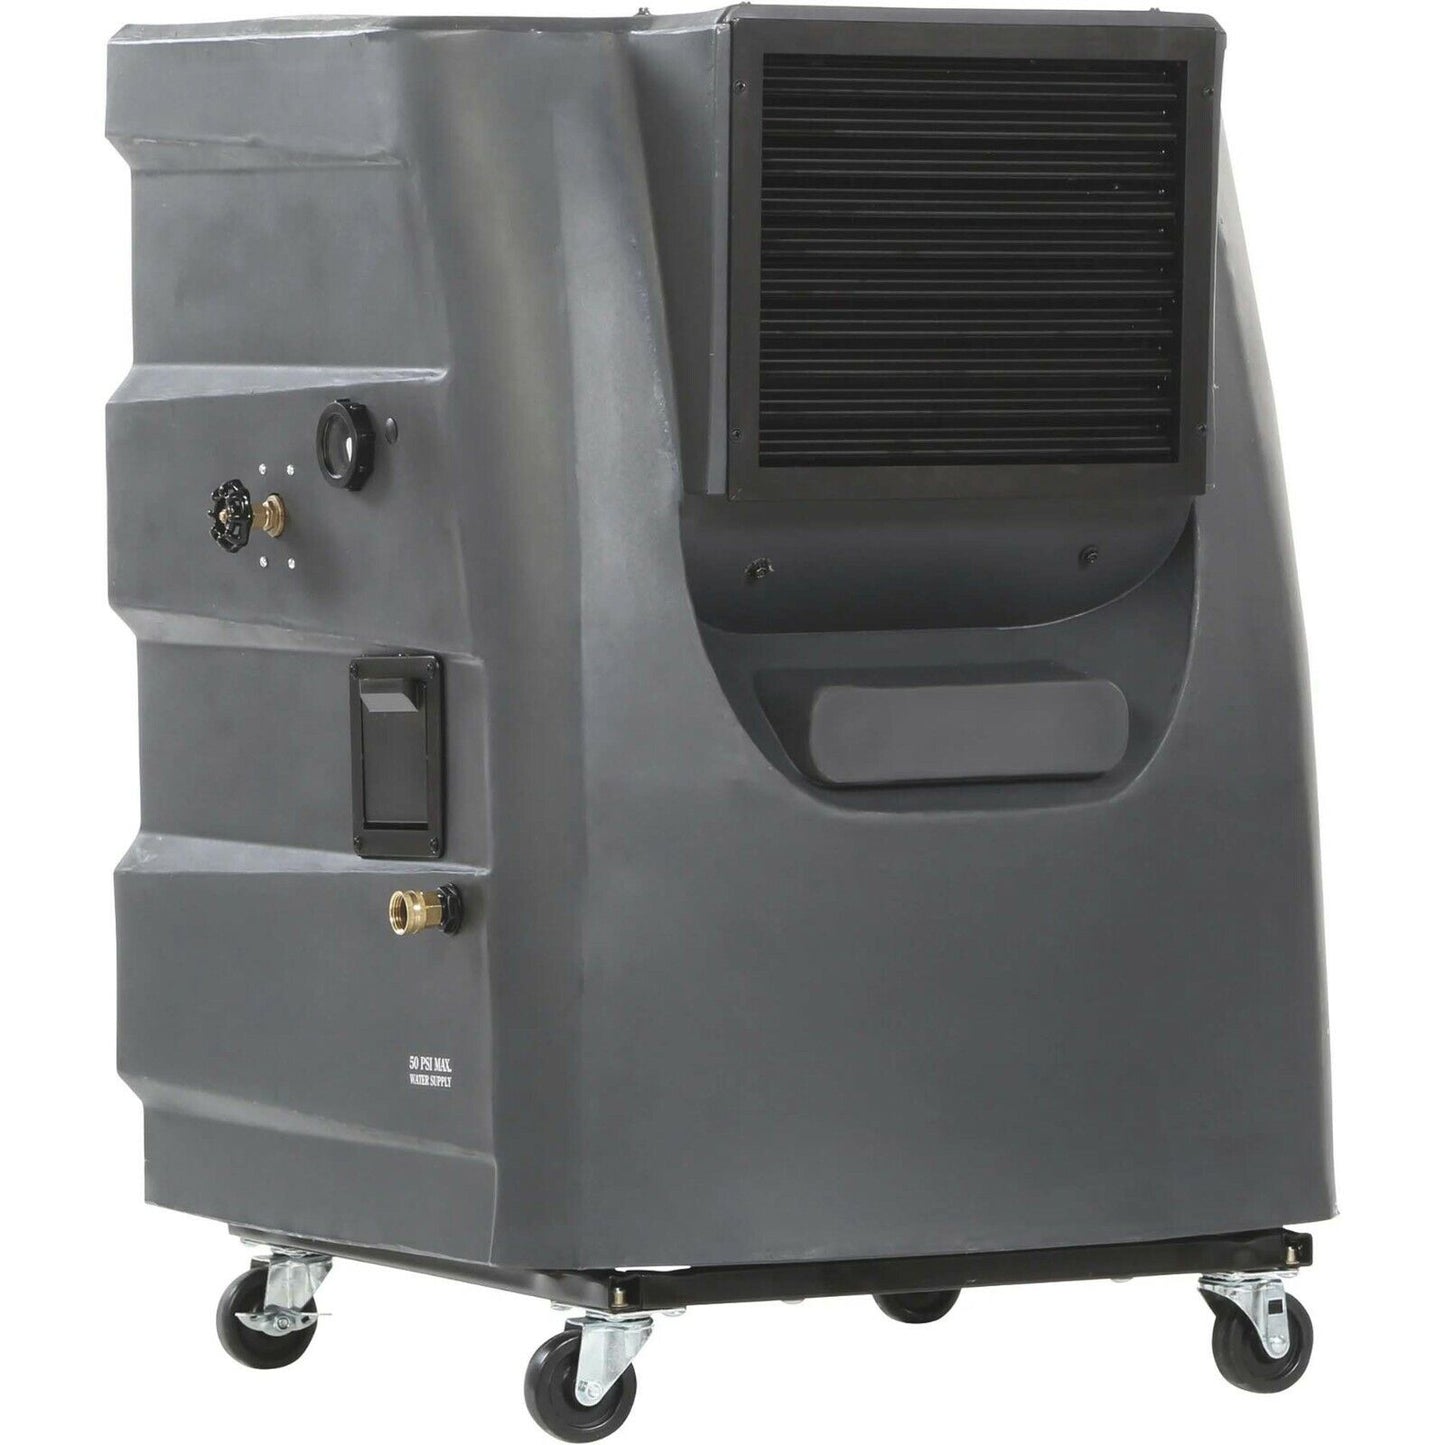 Portable Evaporative Cooler - Direct Drive - 2 Speed - 16 Gallon - Industrial